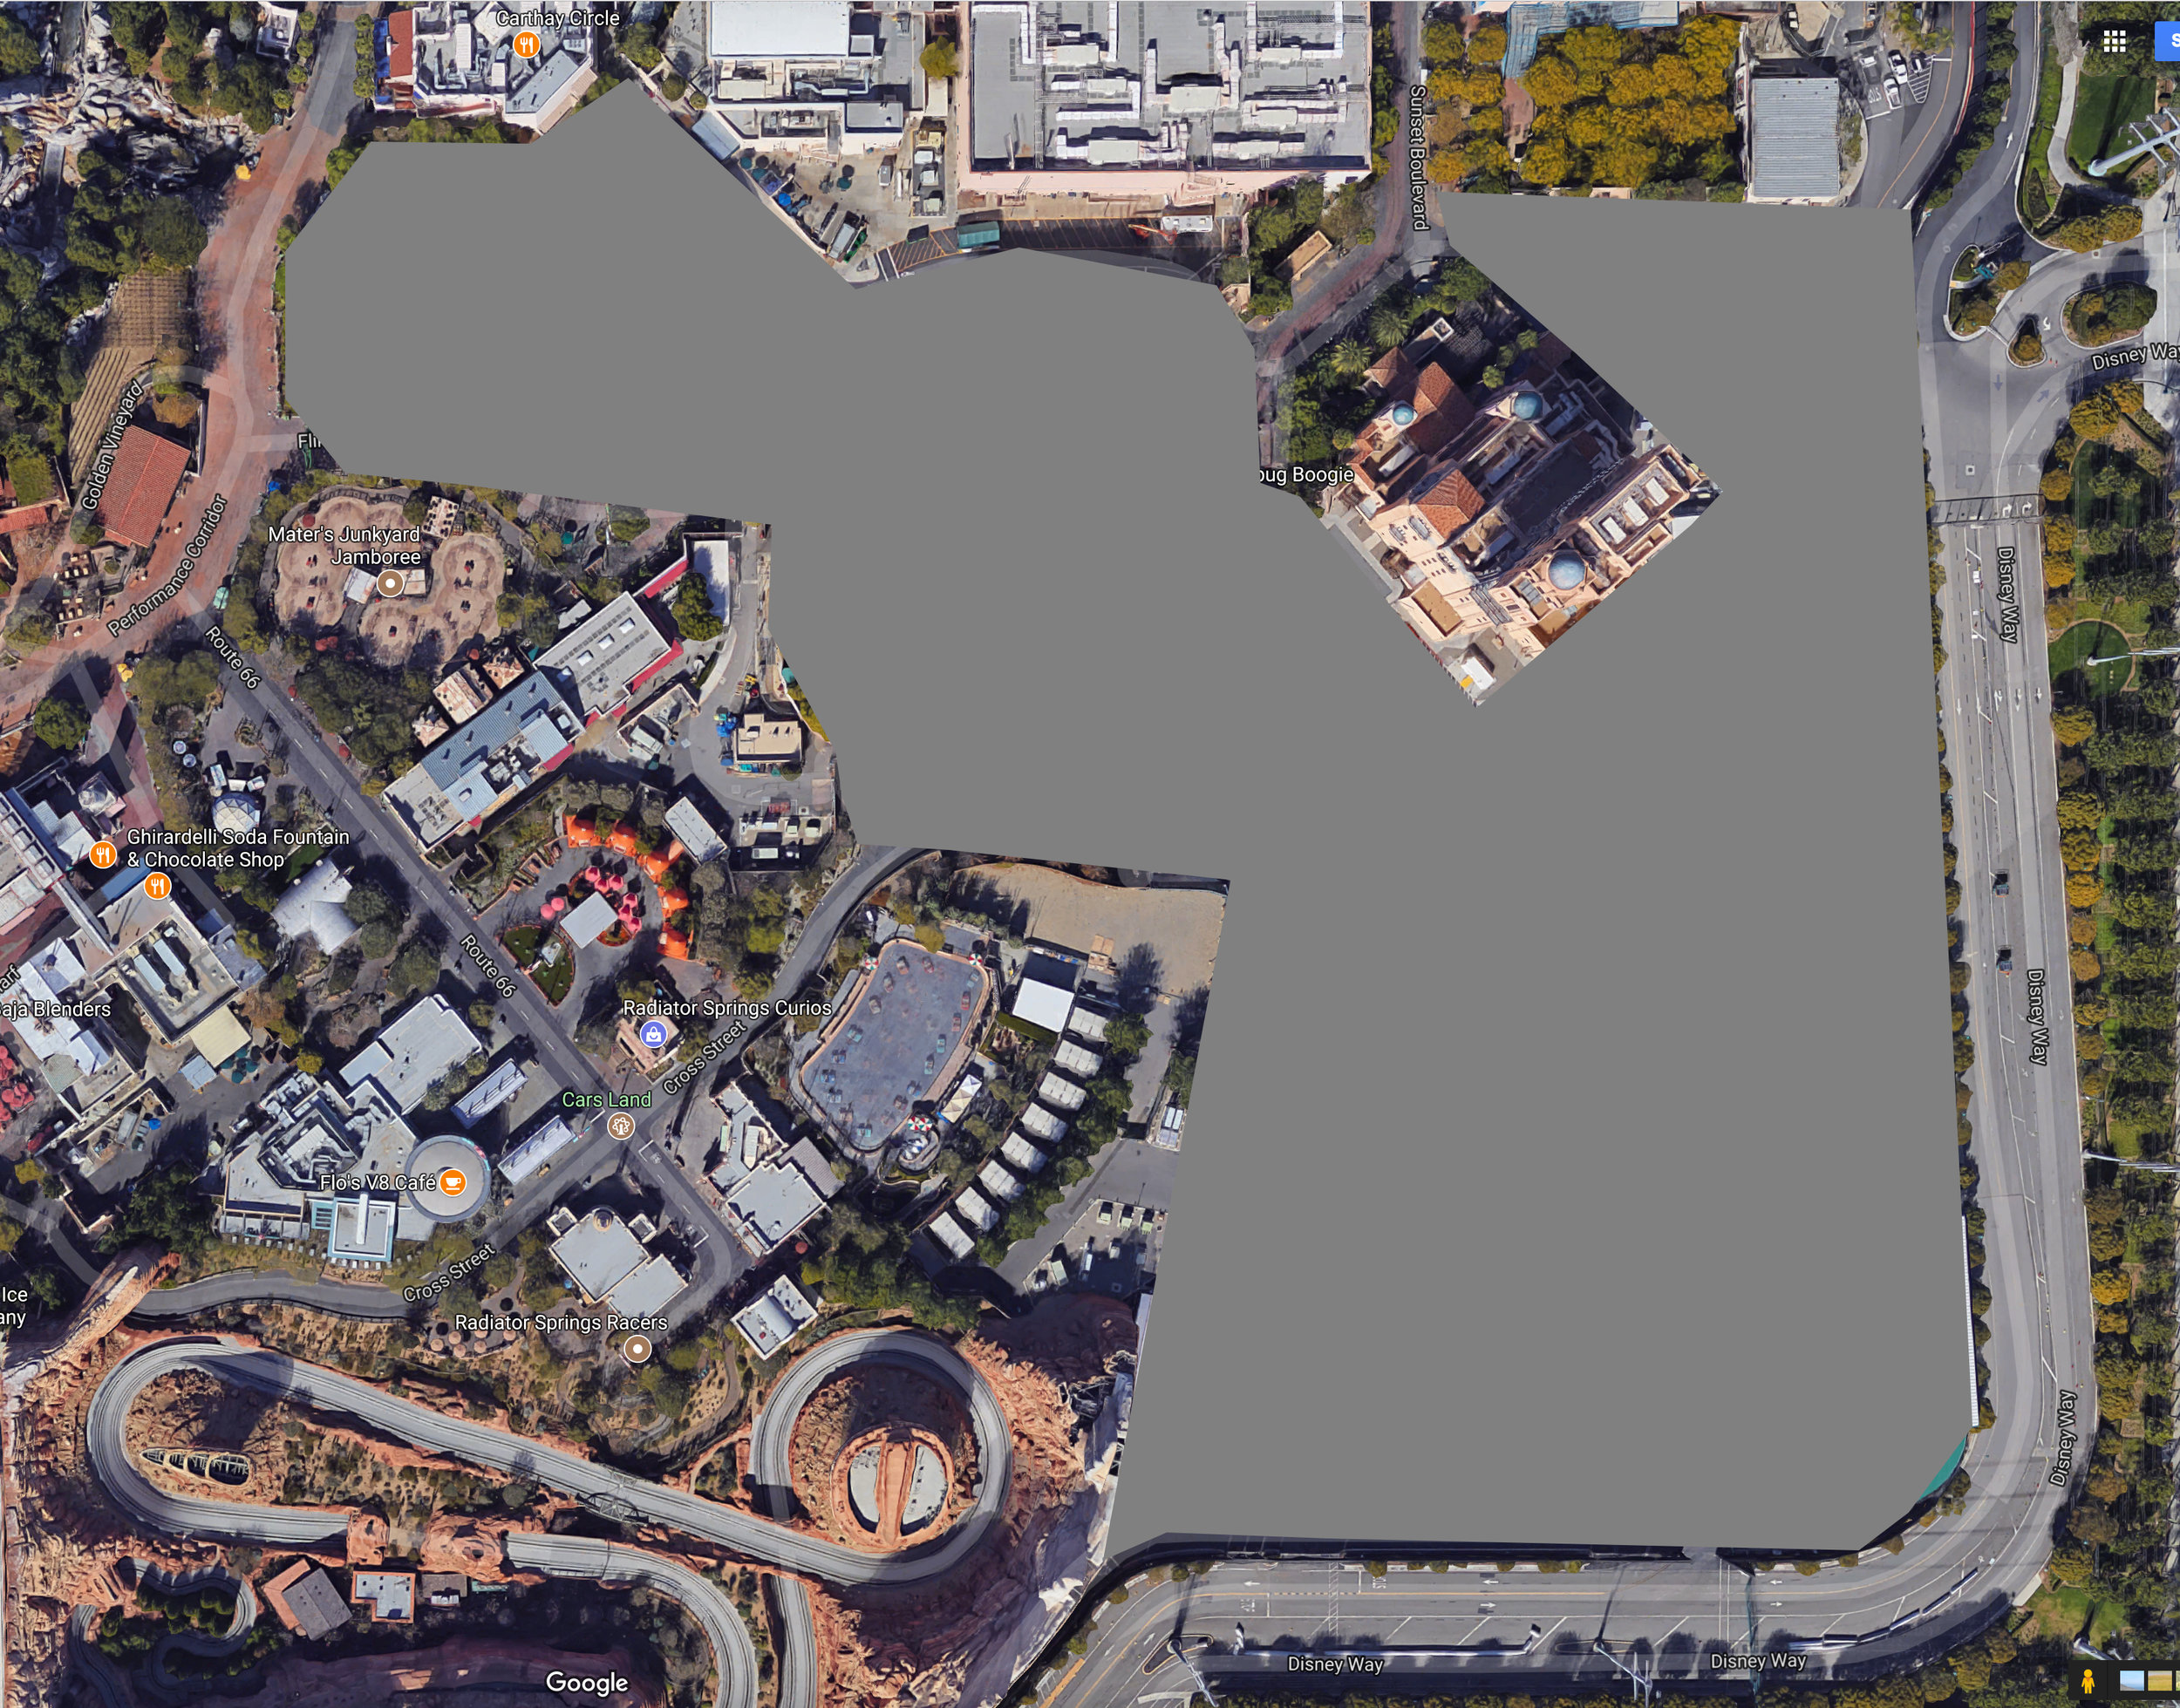  Possible area for future Marvel Land expansion project. 